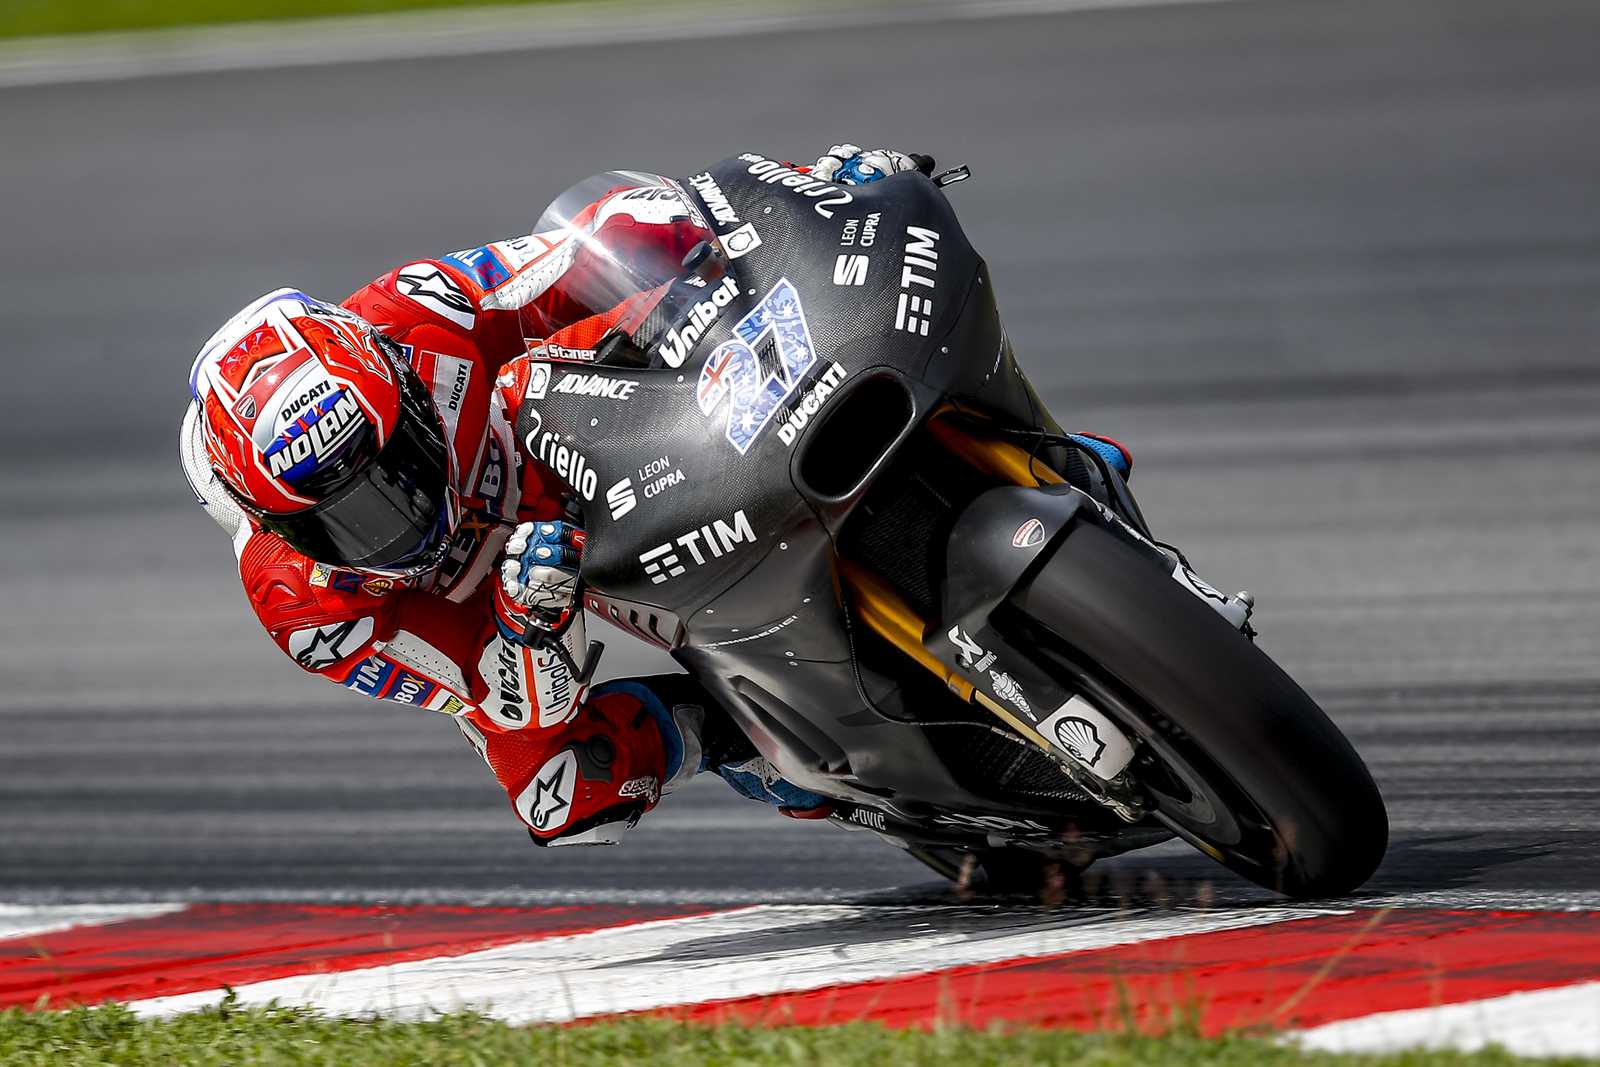 Ducati MotoGP Test Rider Casey Stoner Fastest On First Day Of Pre-Season Testing At Sepang